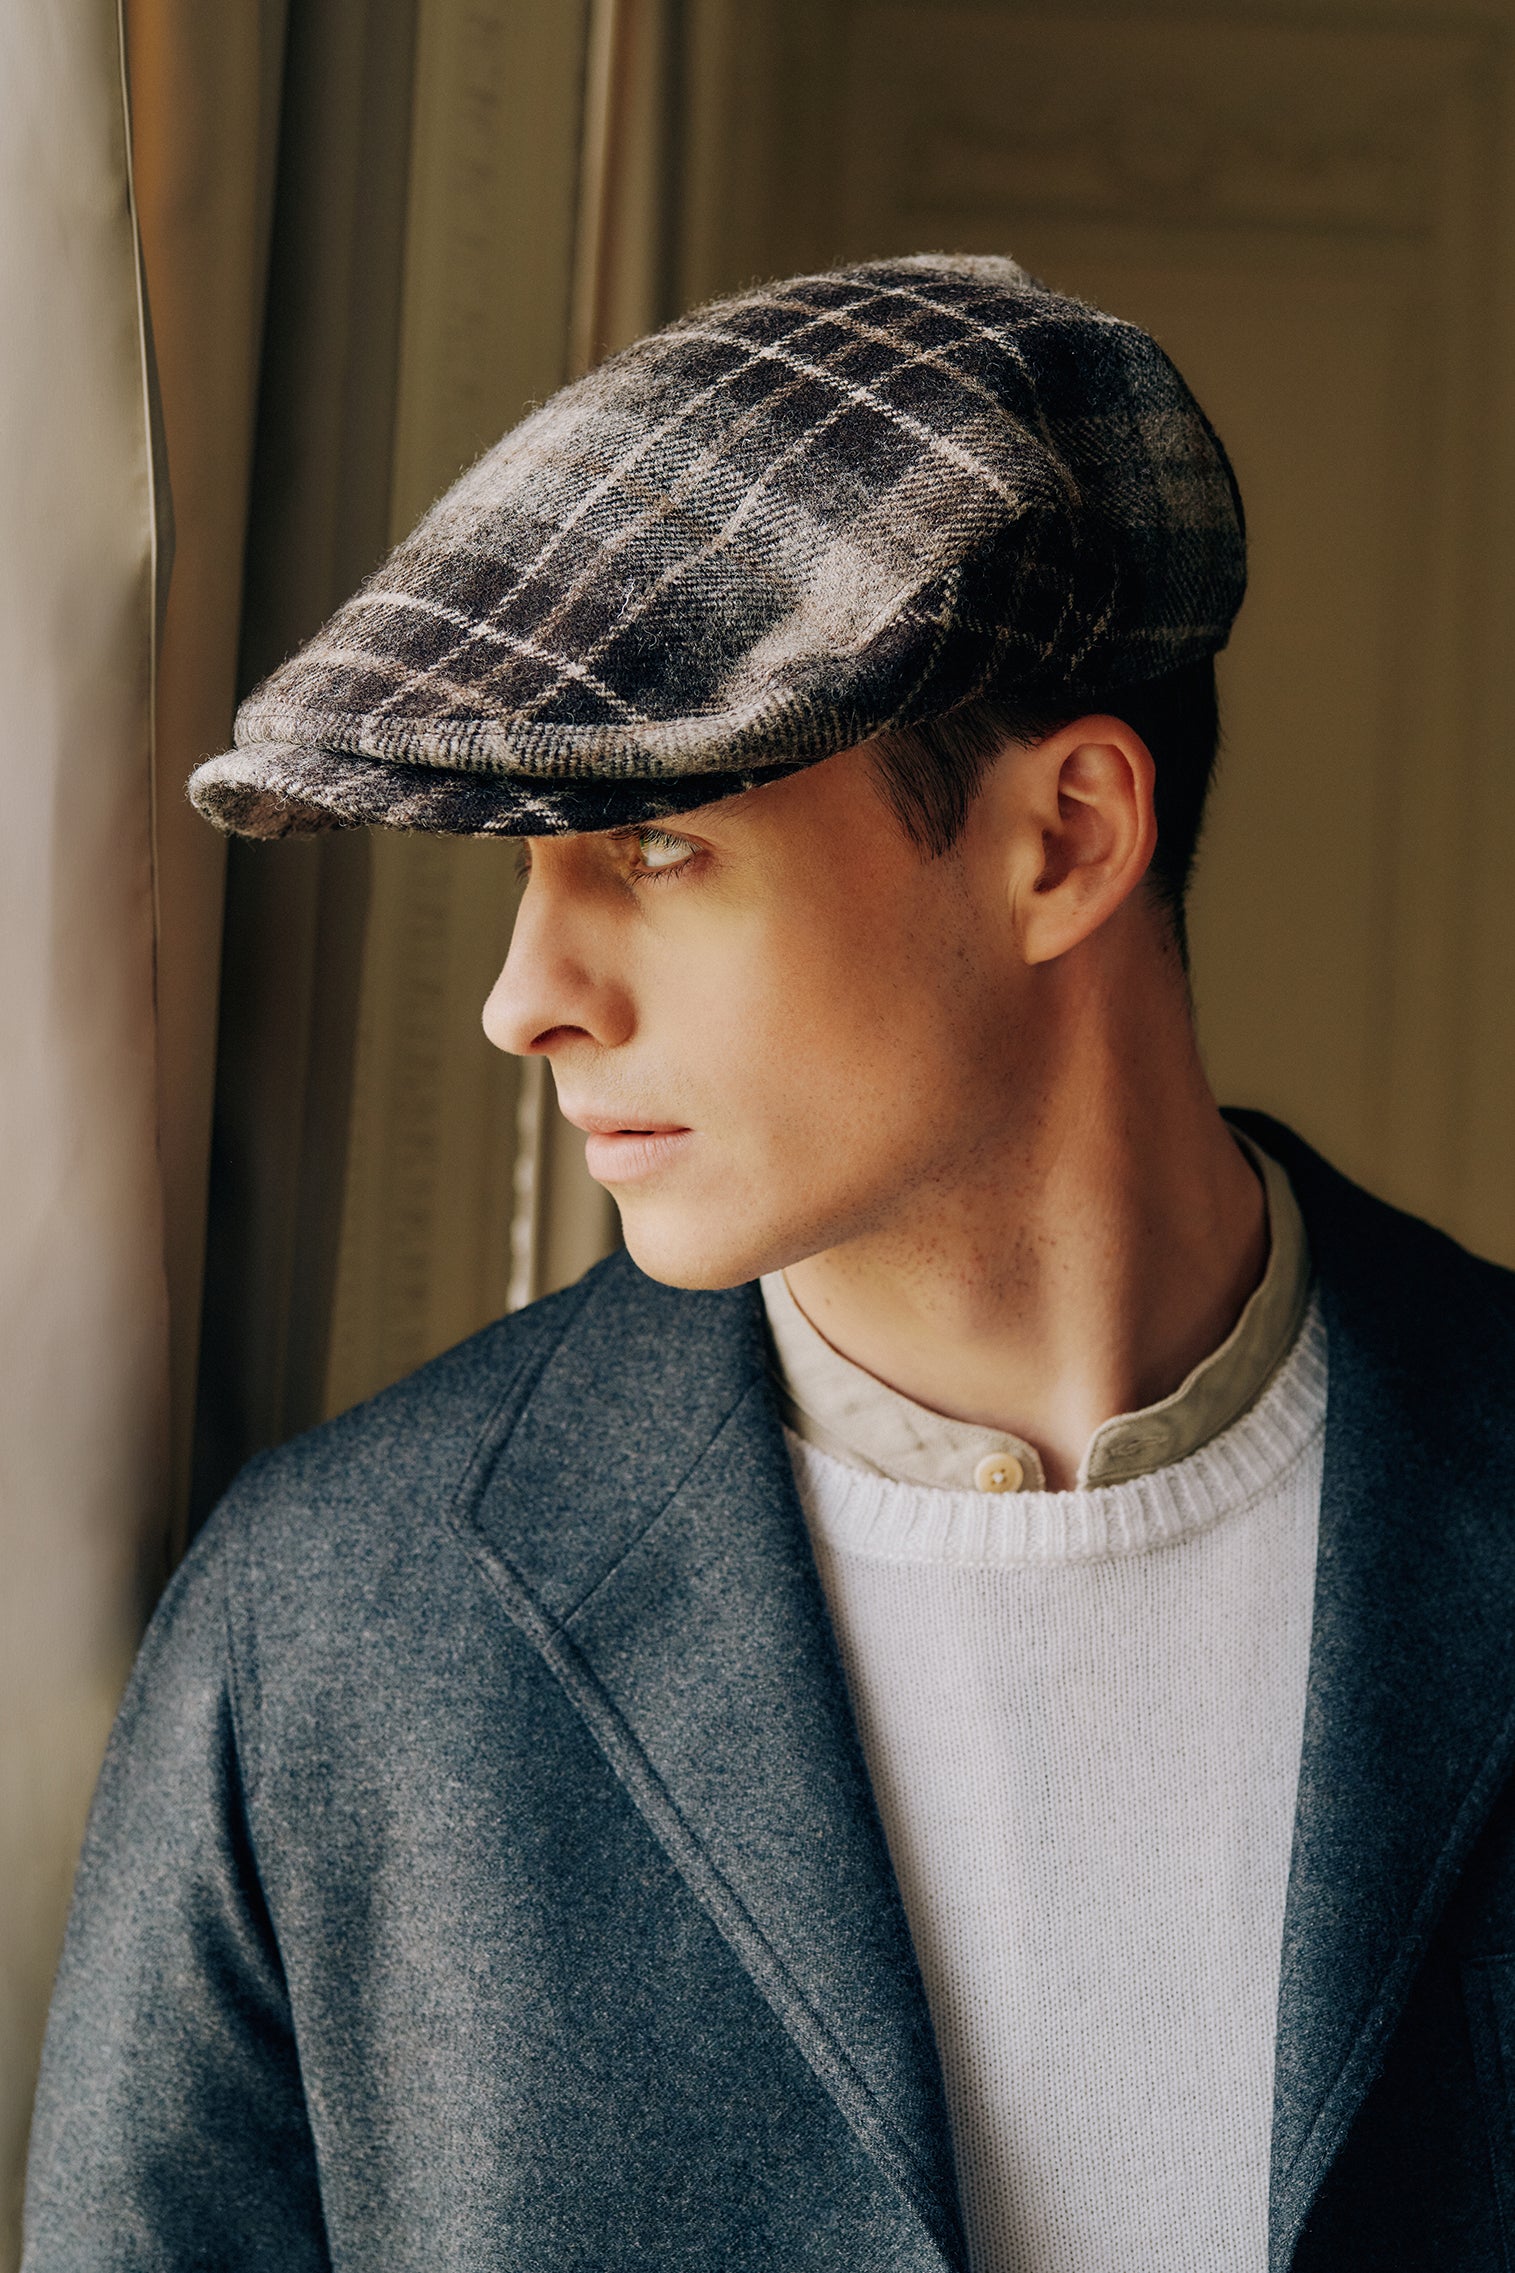 Turnberry Plaid Flat Cap - Hats for Tall People - Lock & Co. Hatters London UK